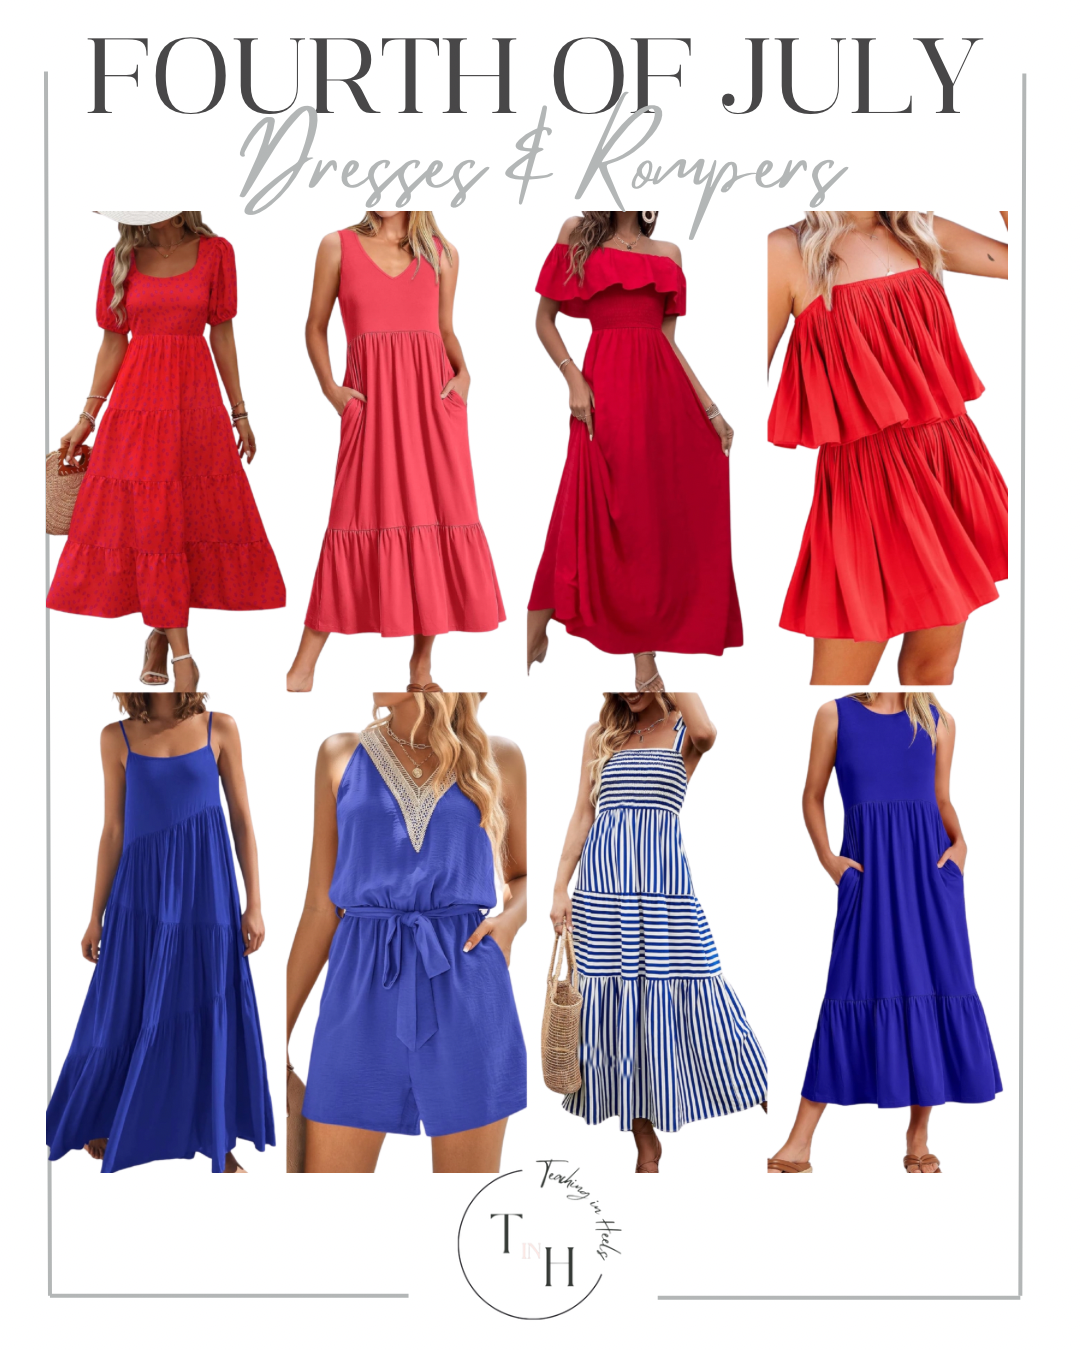 4th of July Style Guide: Must-Have Outfits & Essentials

fourth of july, summer, summer outfit, summer fashion, outdoor hosting, maxi dresses, women's dresses, americana dresses, Amazon 